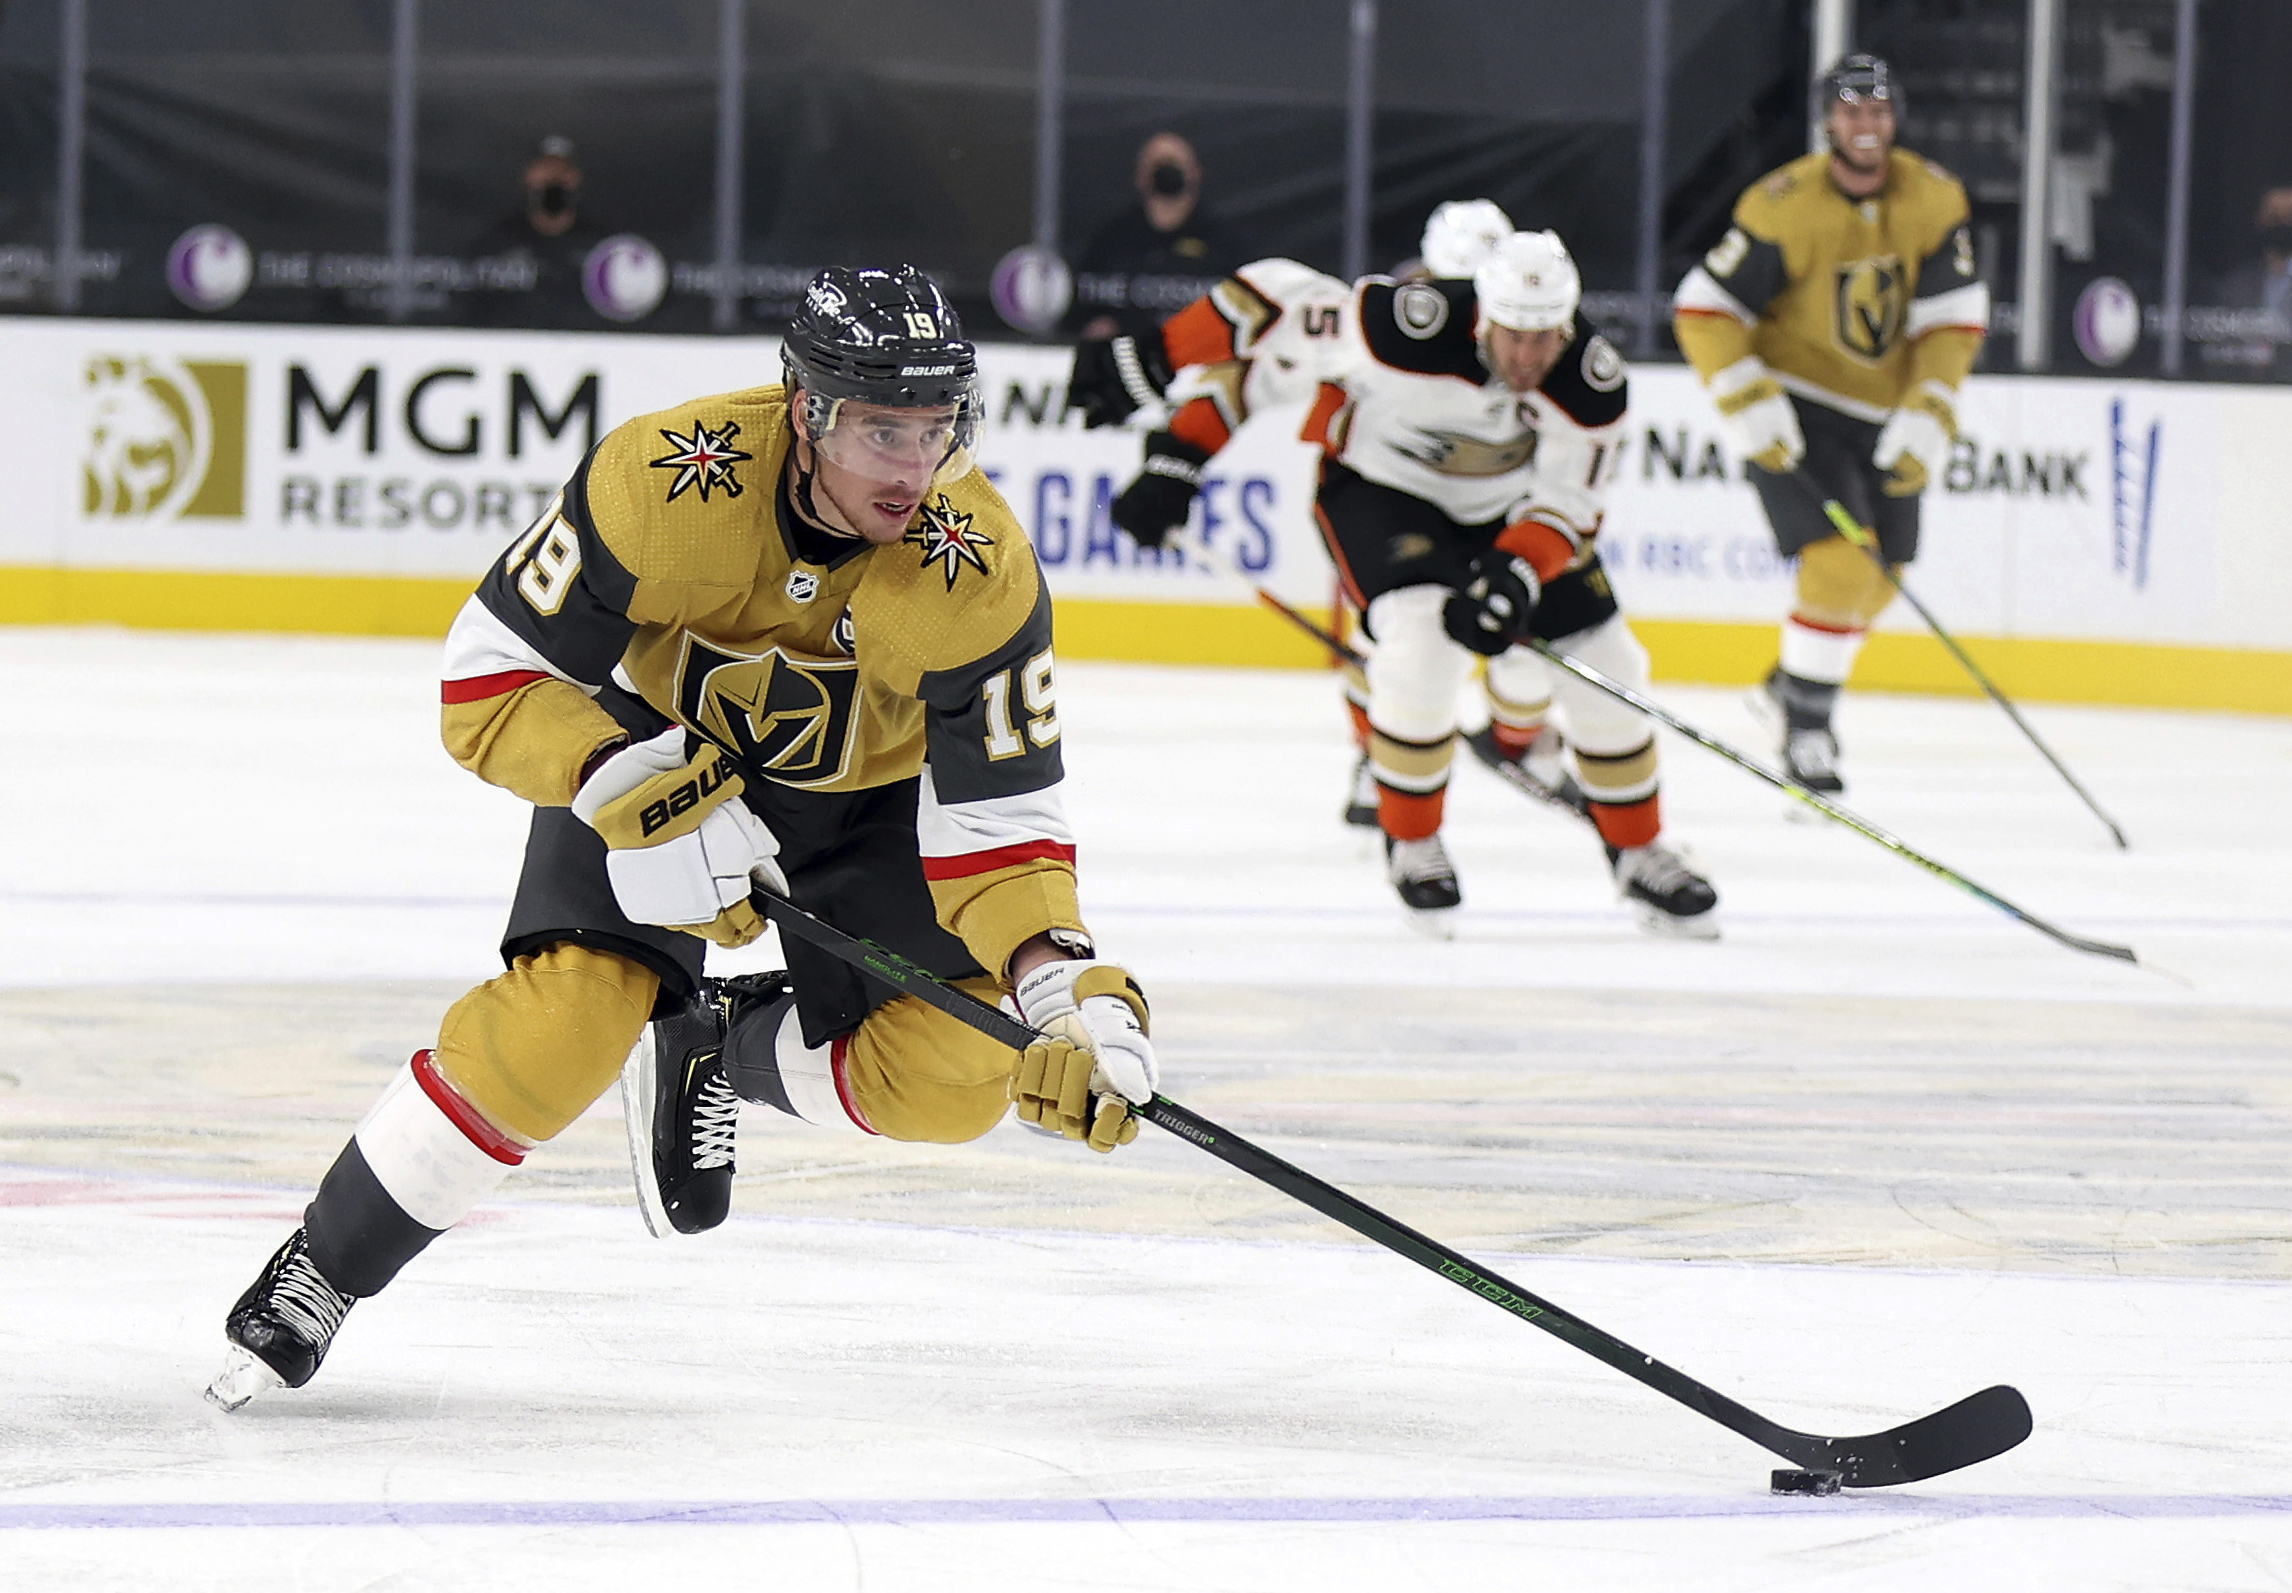 NHL How to LIVE STREAM FREE the Vegas Golden Knights at Minnesota Wild Monday (3-8-21)